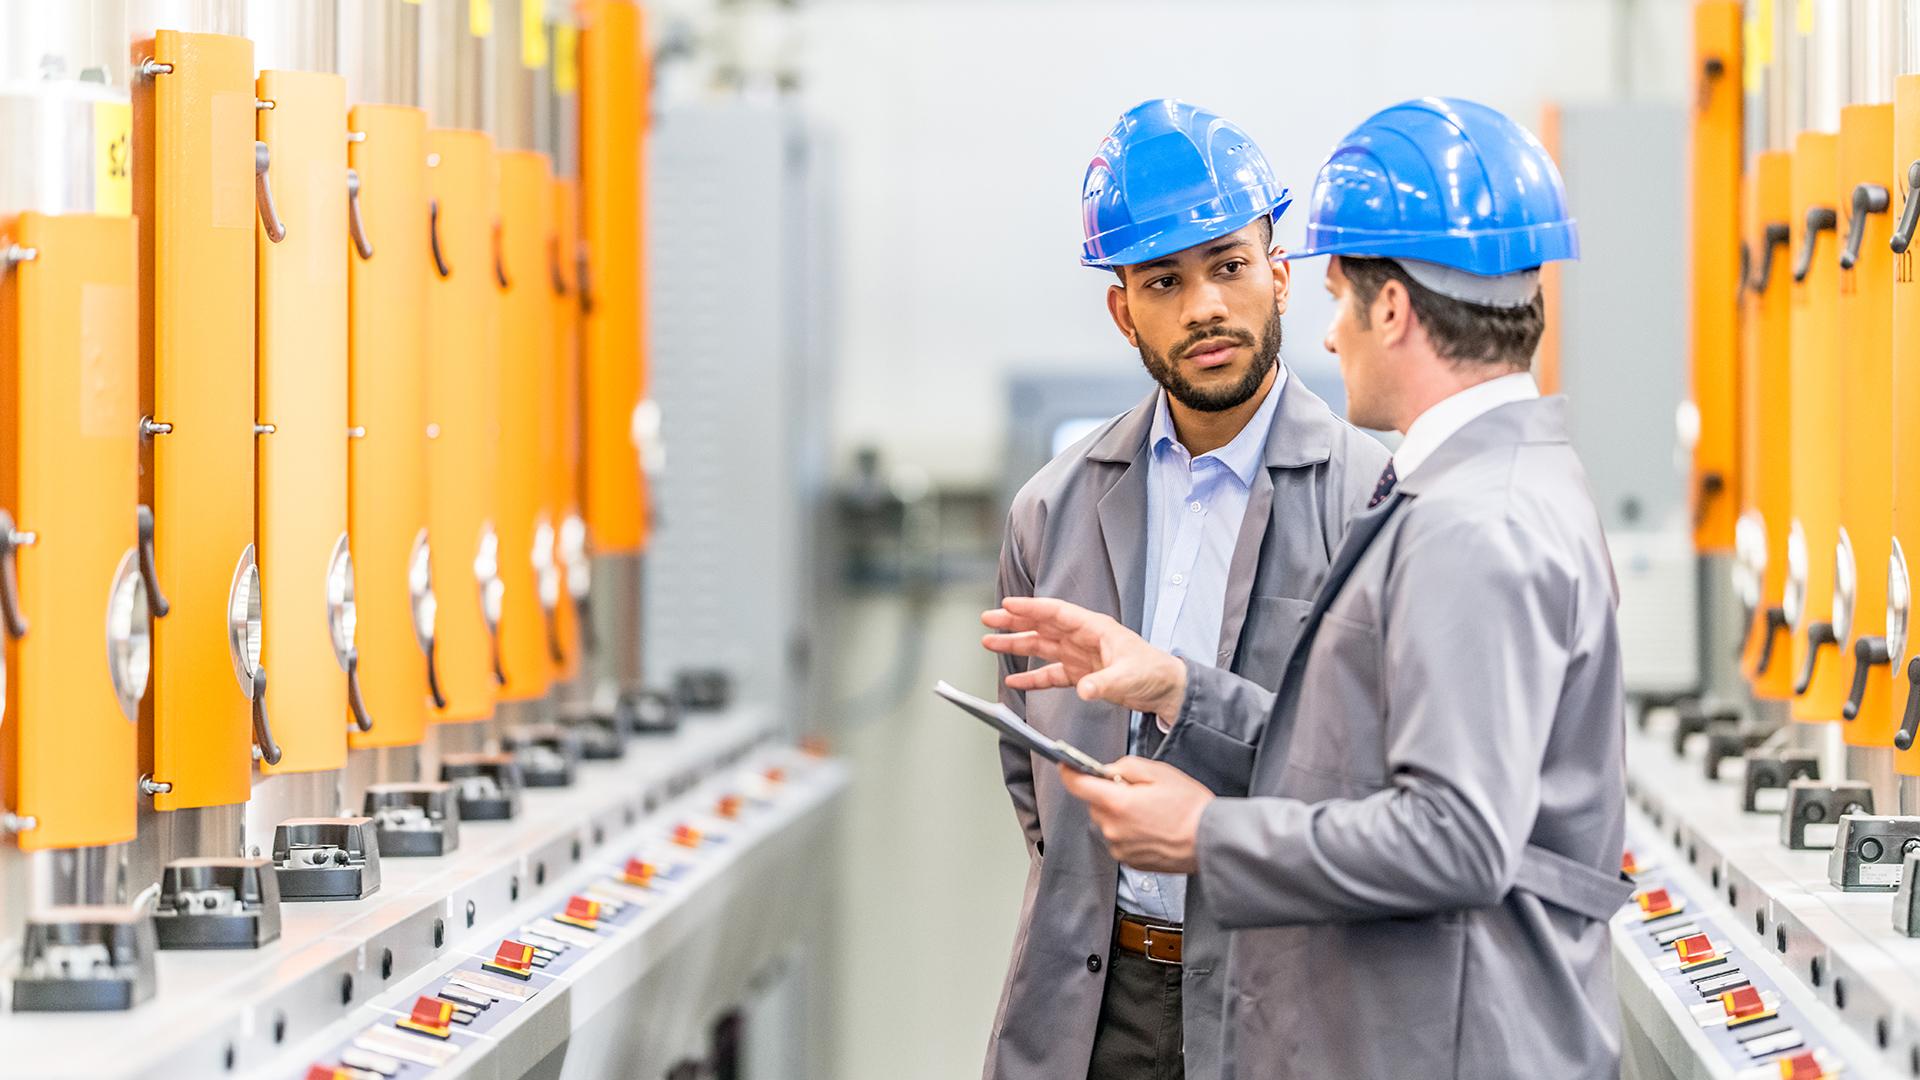 Engineers talking while inspecting machinery - stock photo